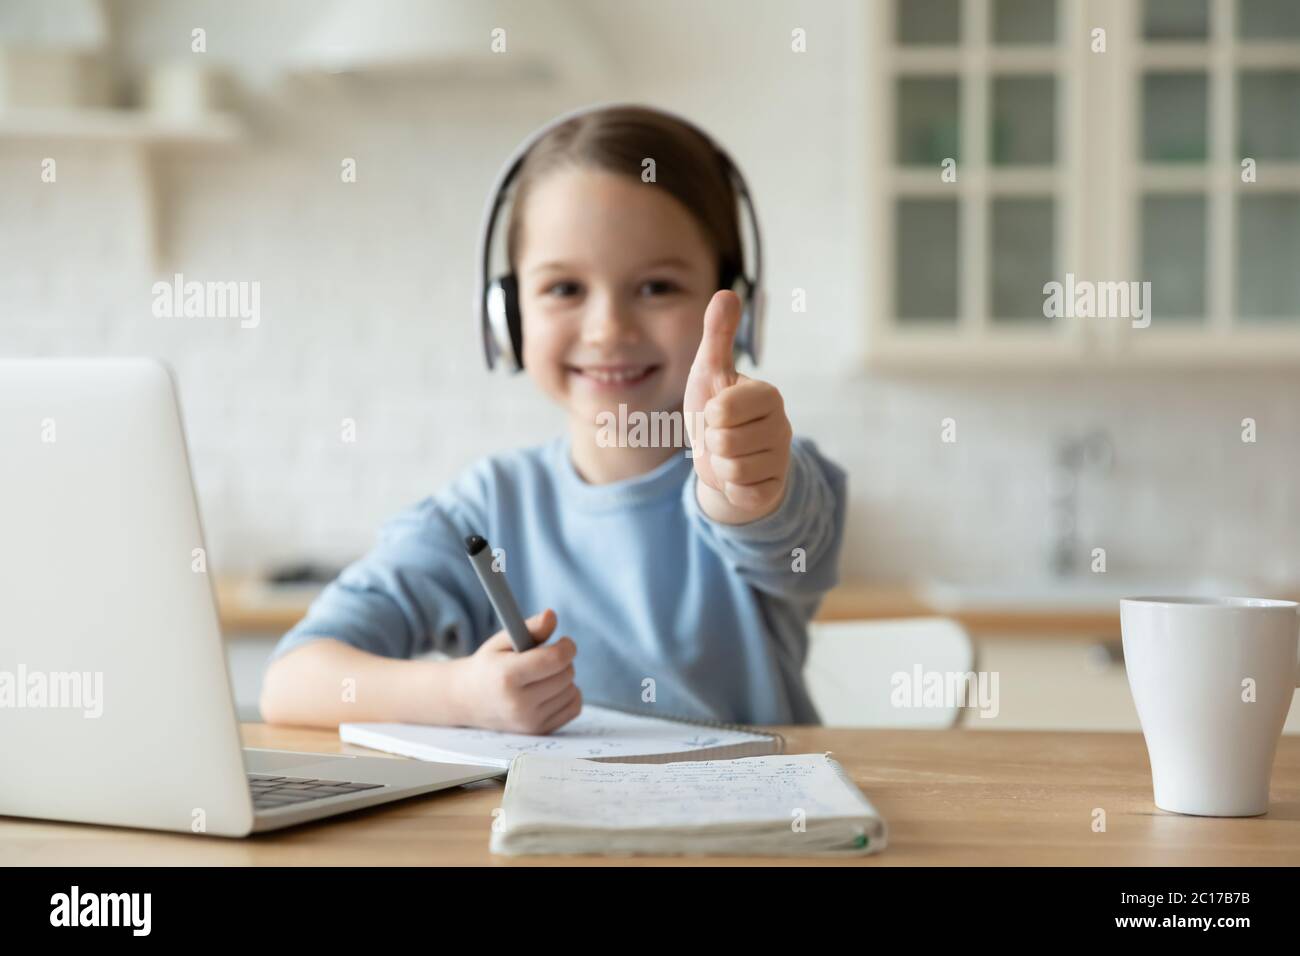 Closeup focus on thumbsup of little girl learning at home Stock Photo